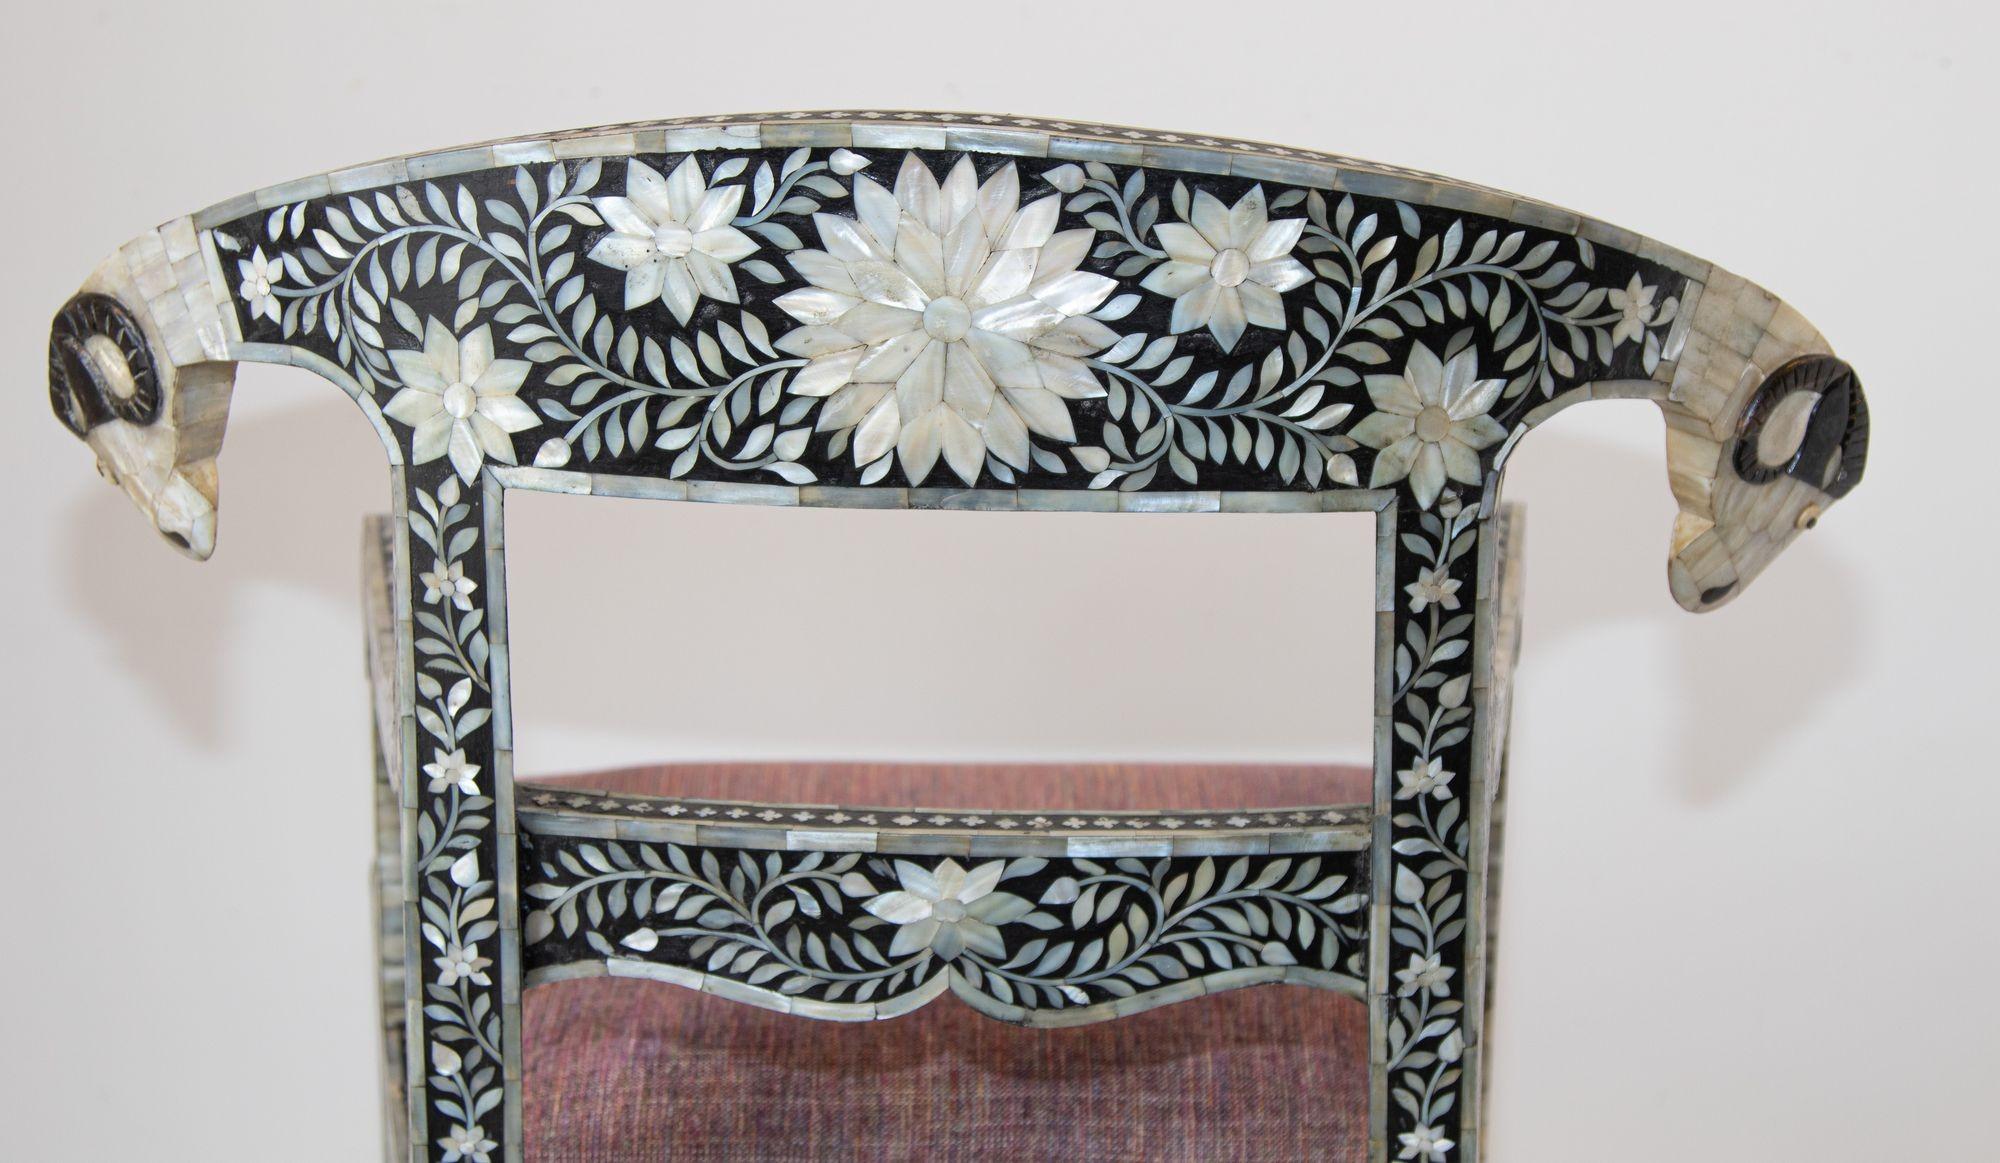 Anglo-Indian Mughal Mother of Pearl Inlaid Klismos Armchair with Ram Head 1 of 2 For Sale 2